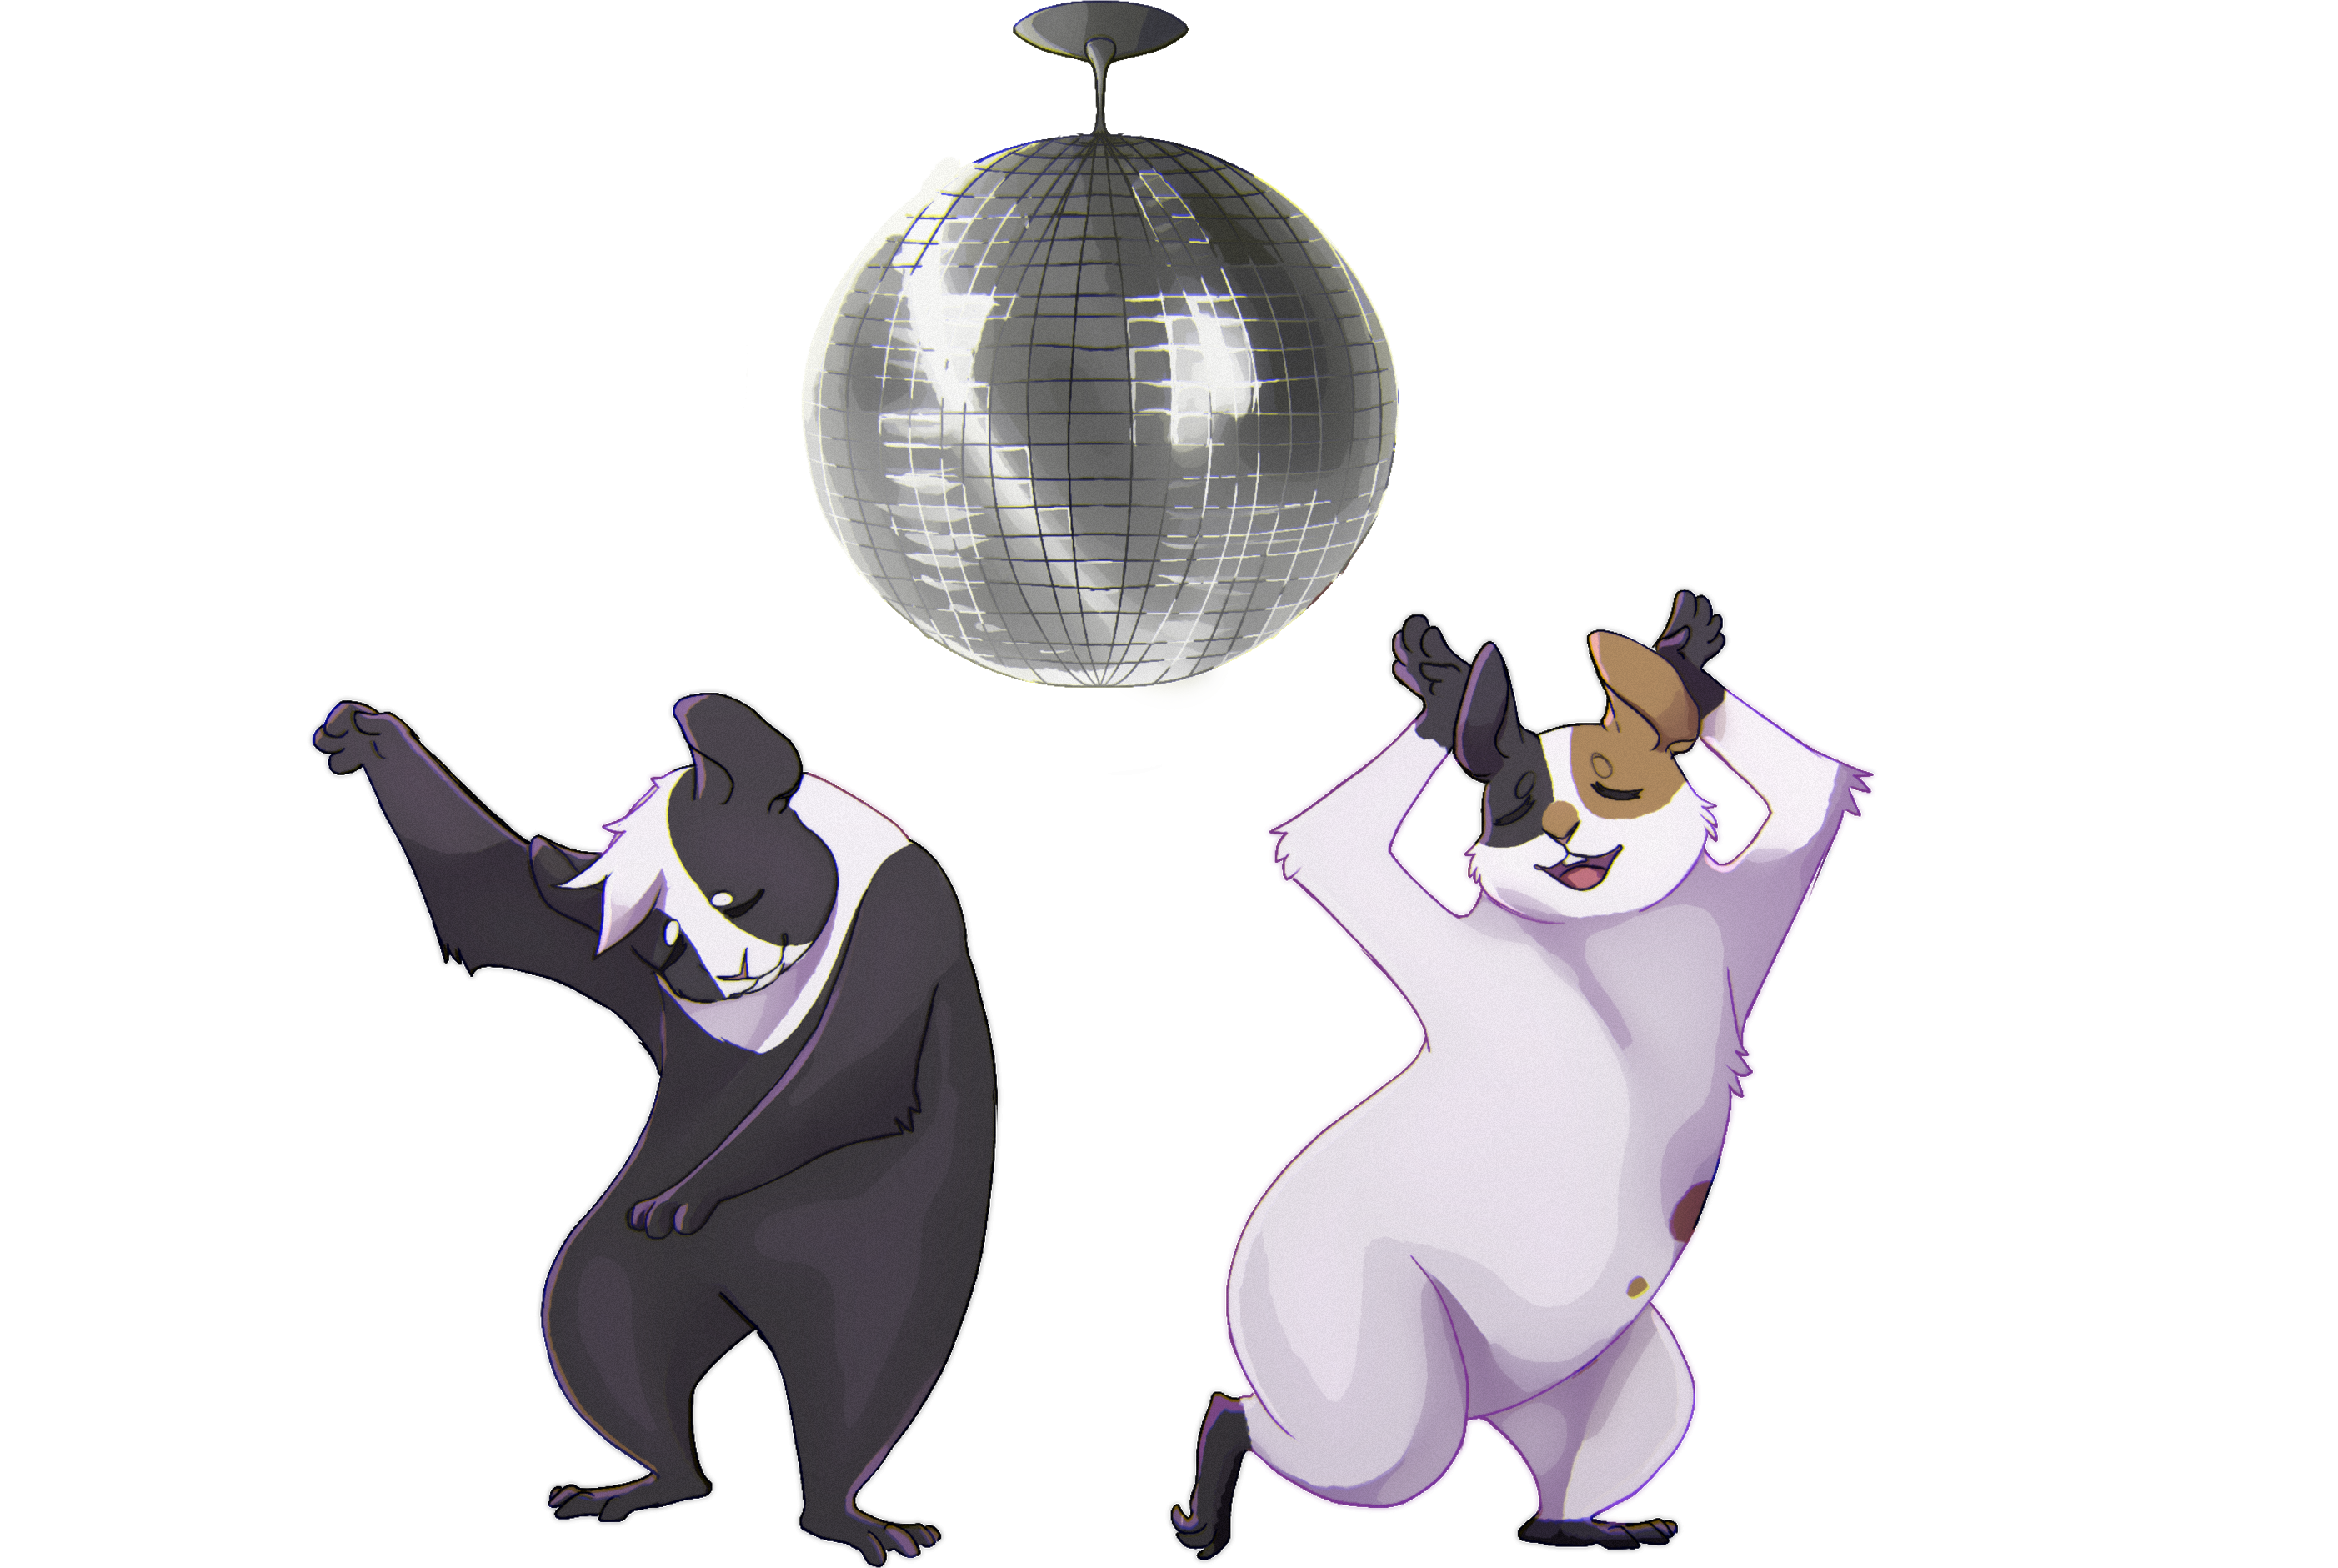 Disco.png